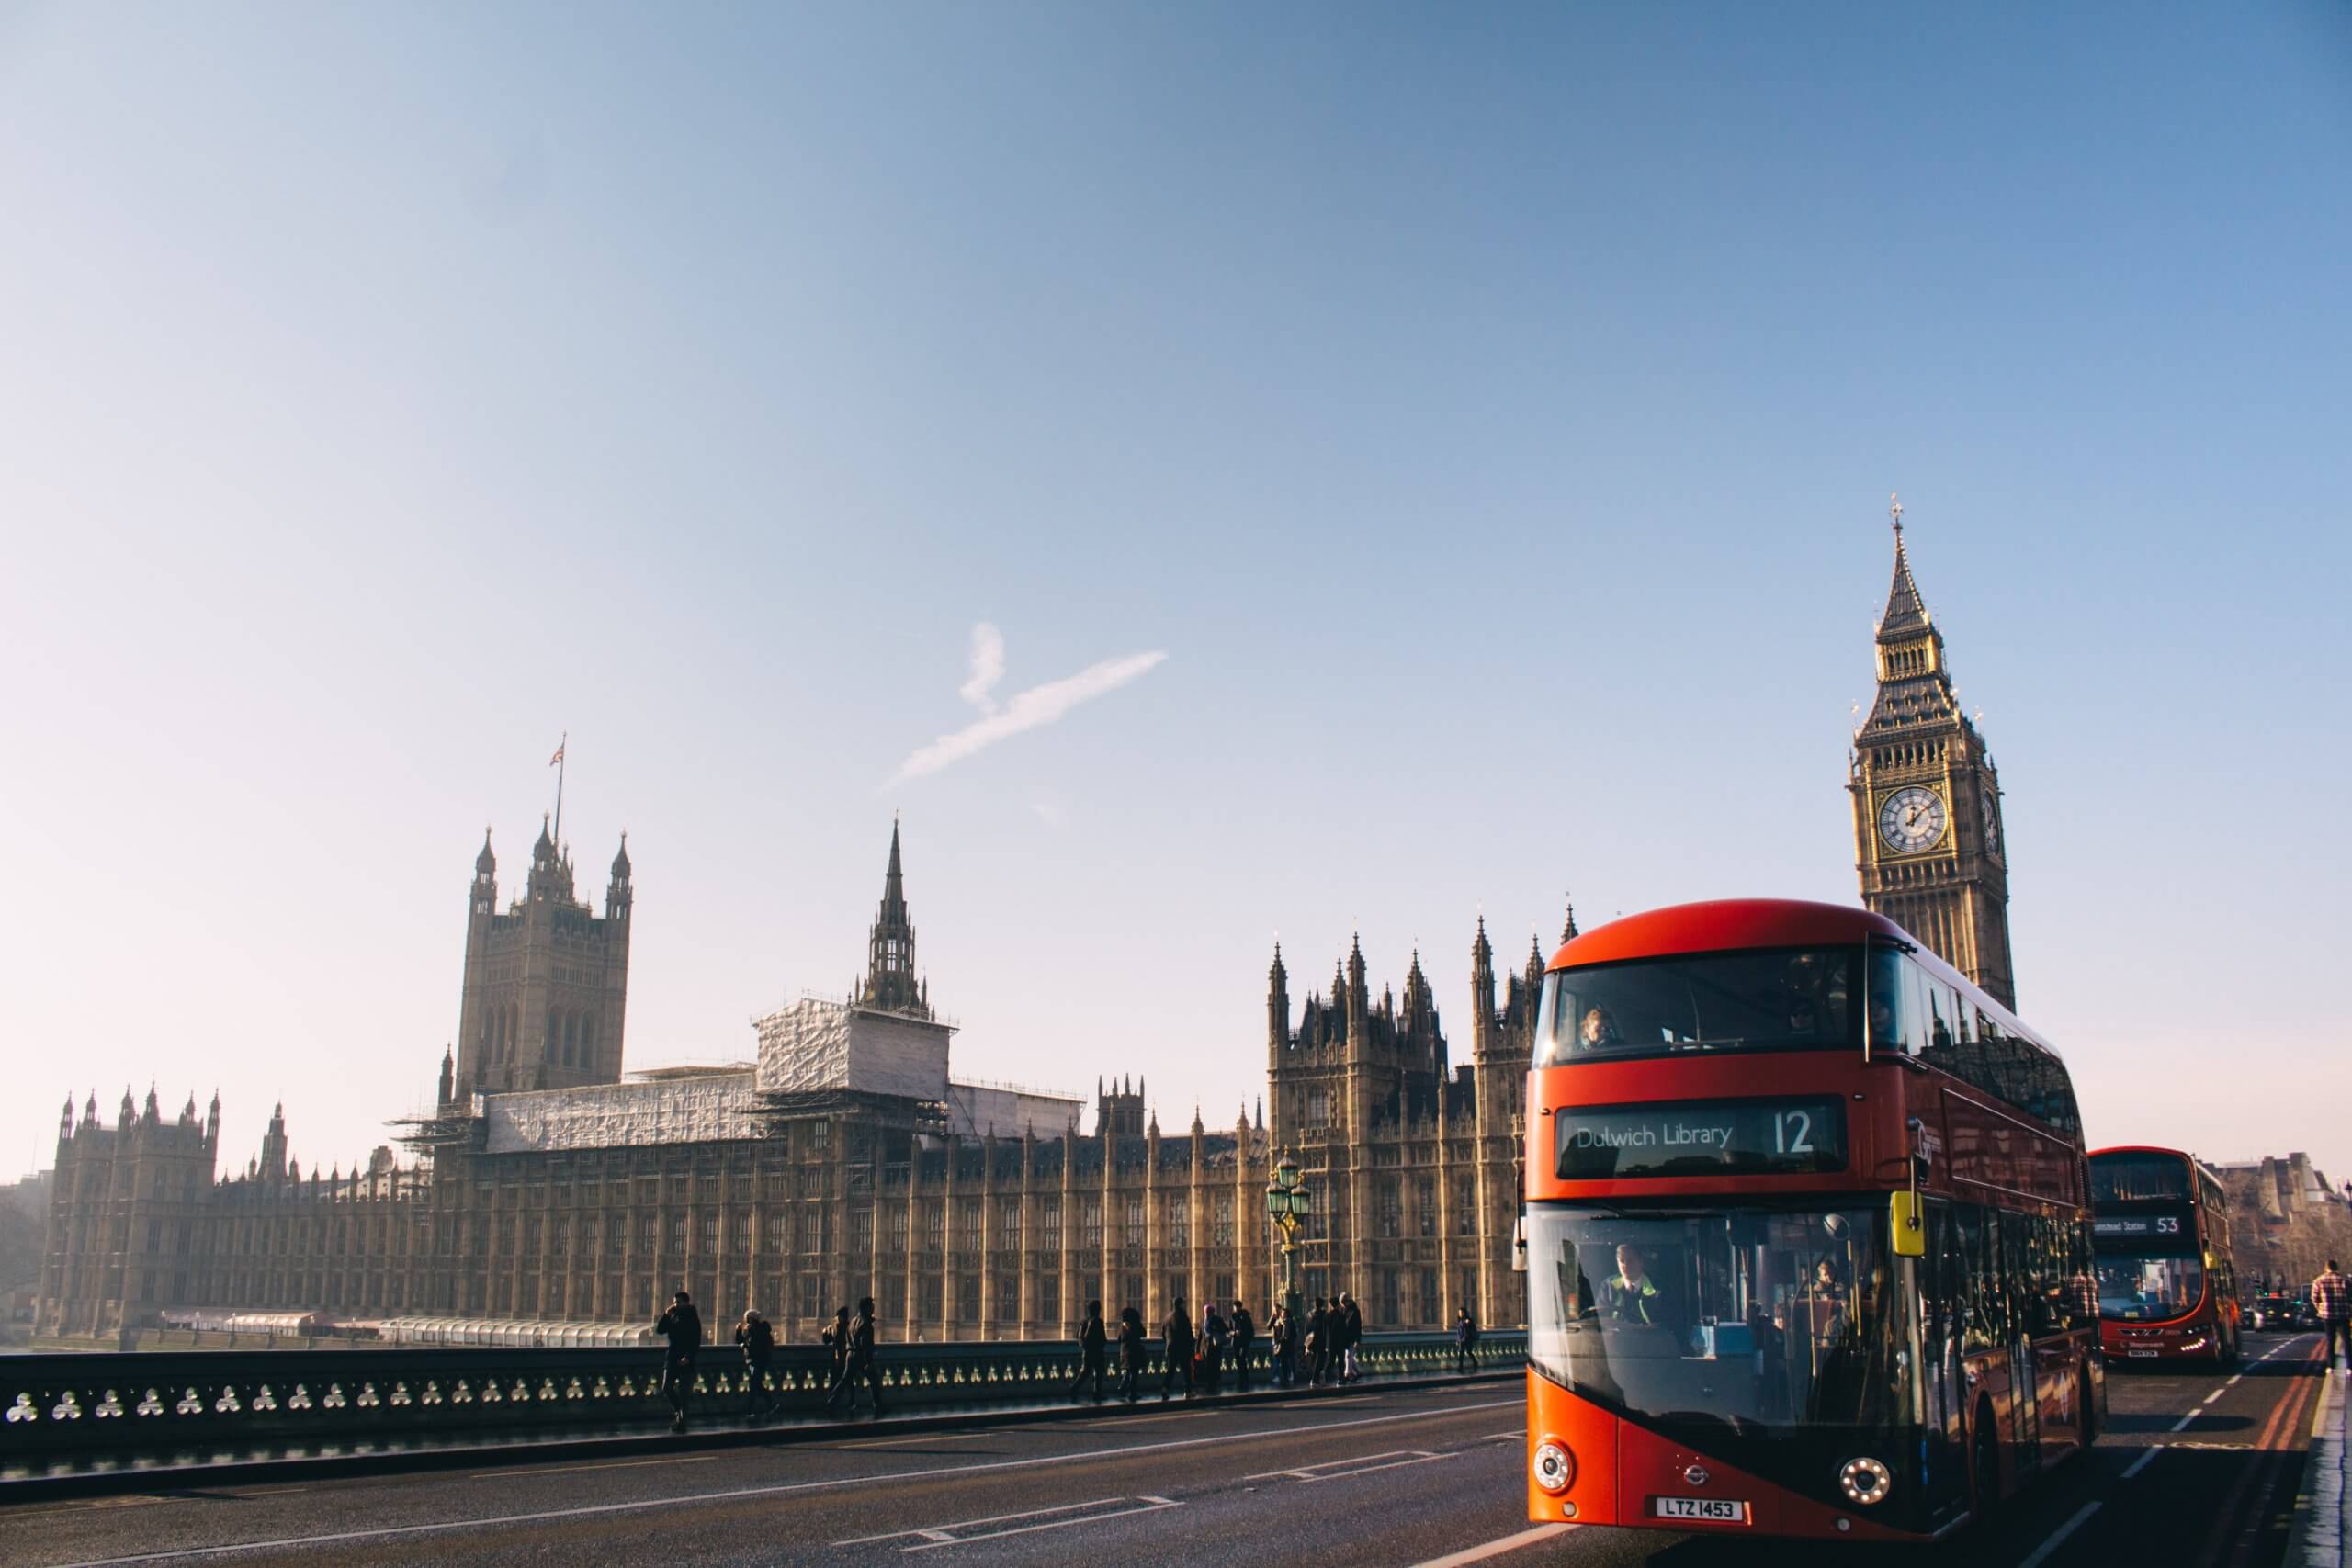 Double decker bus by Parliament in London, England